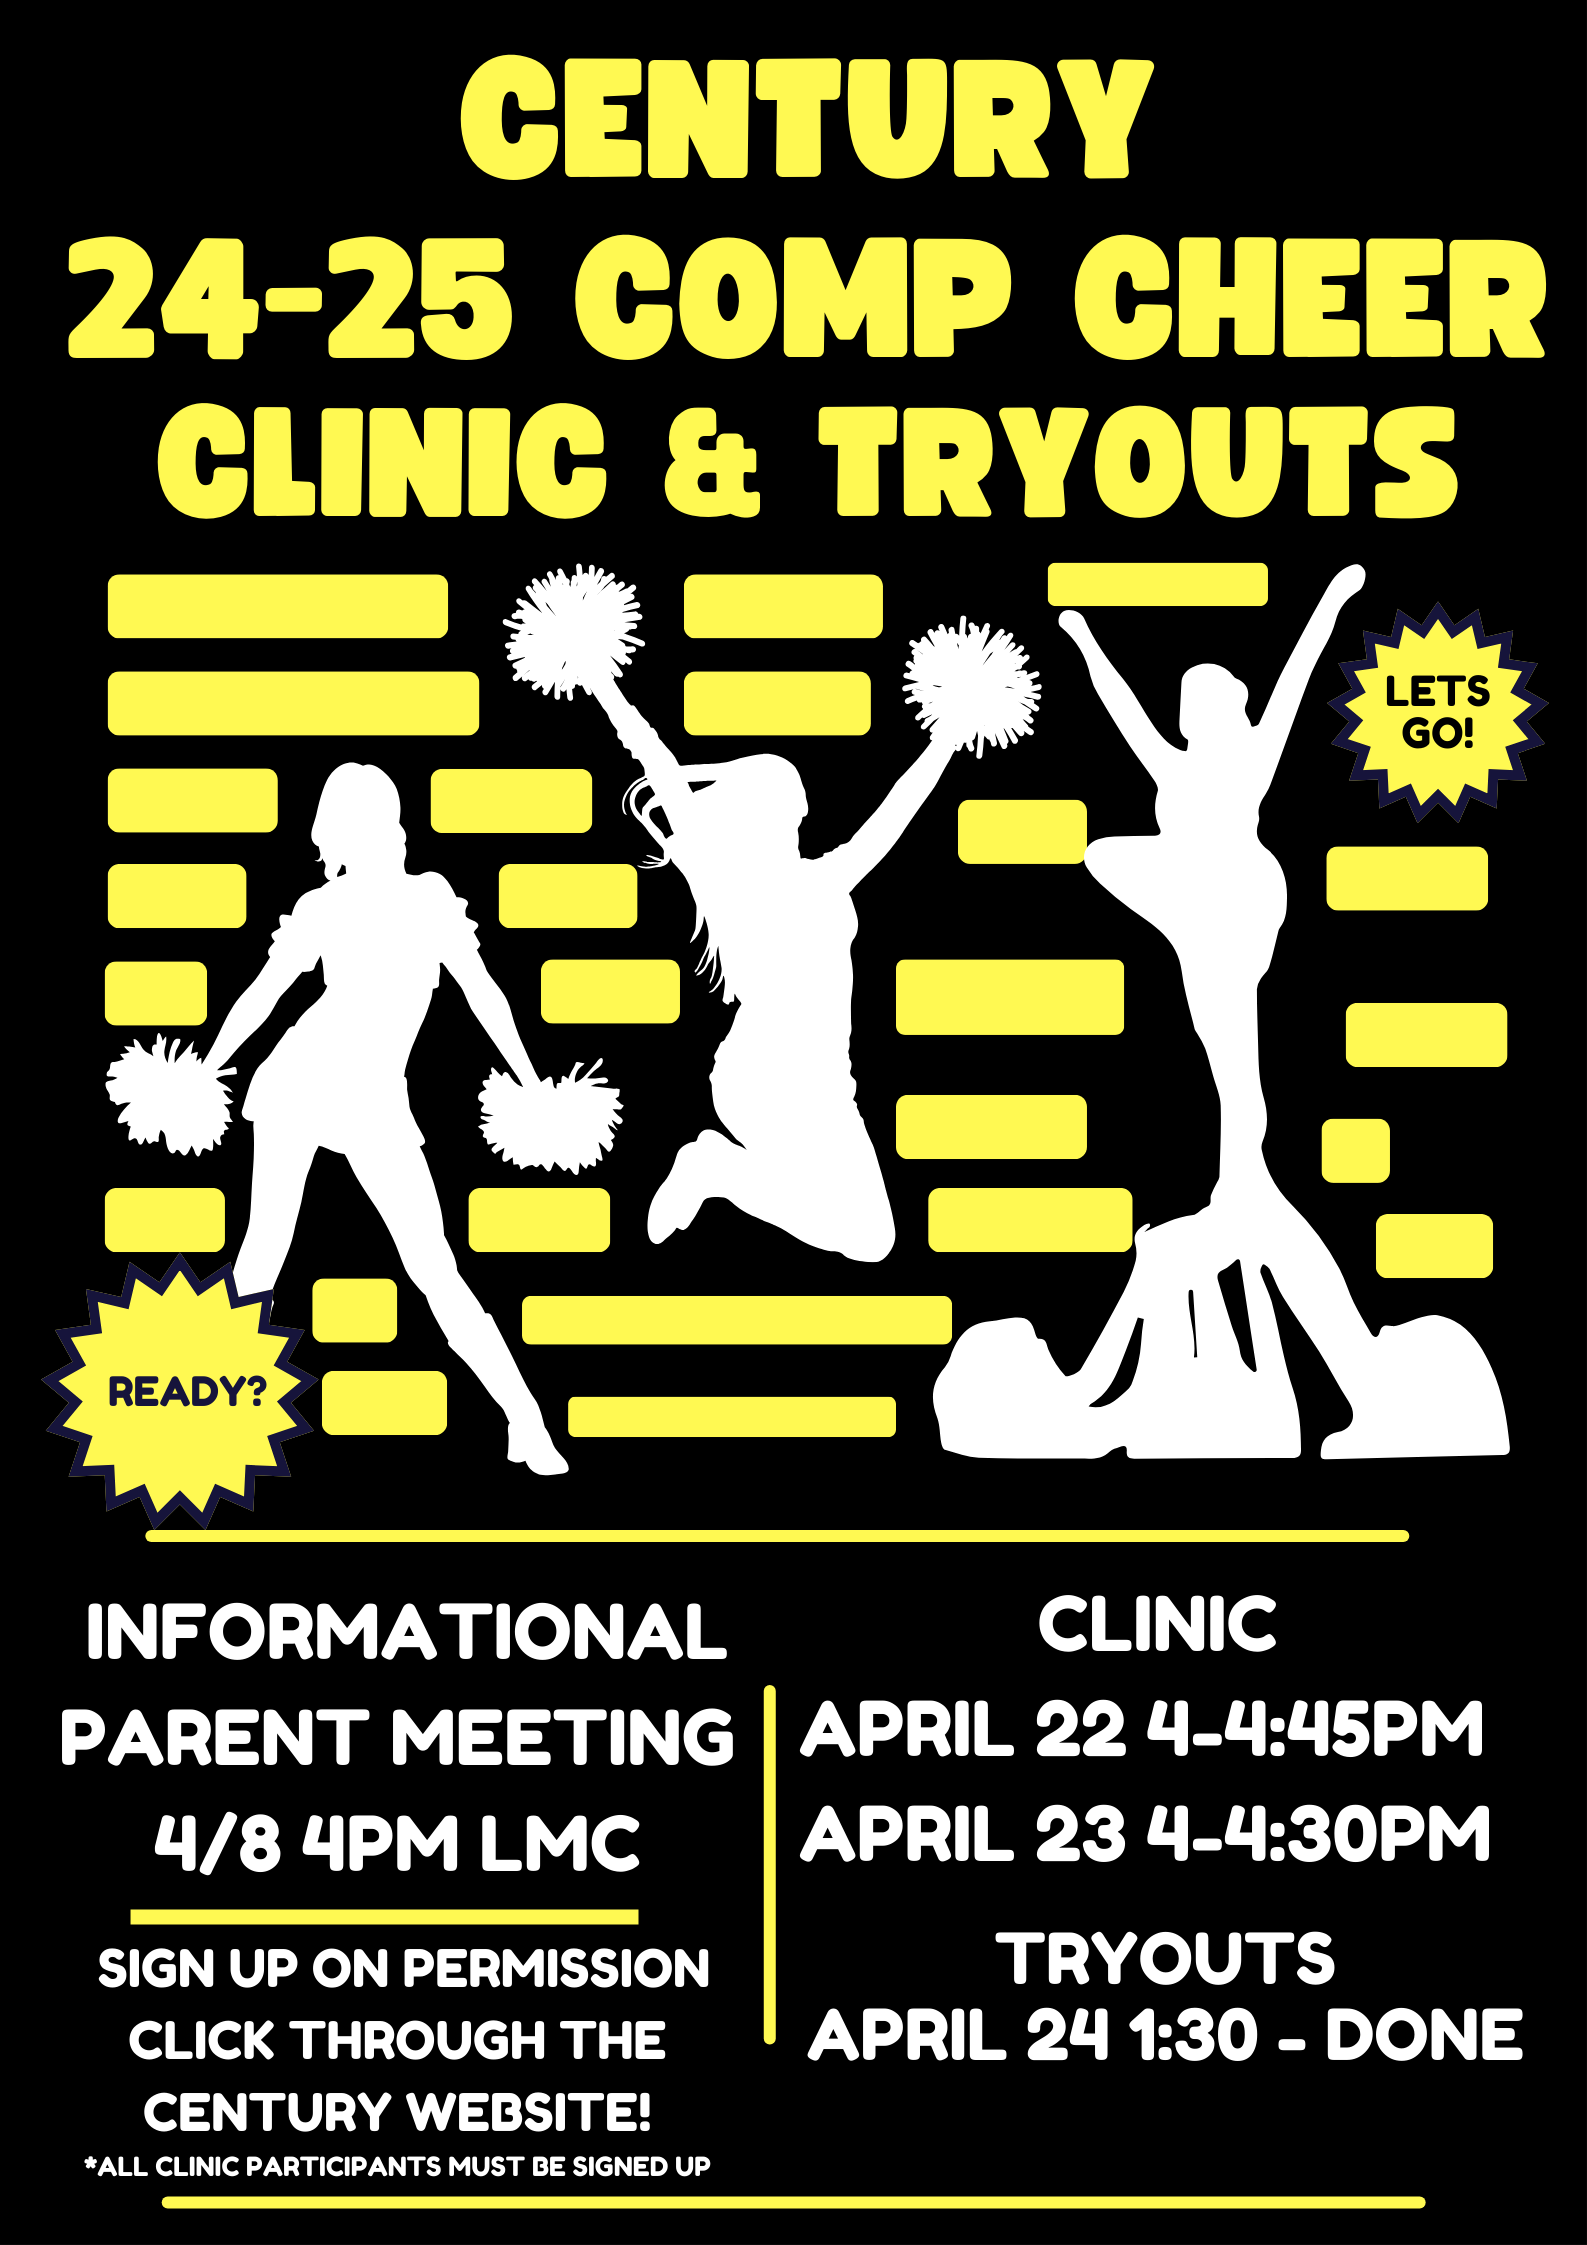 Century 24-25 Comp Cheer Clinic and Tryouts